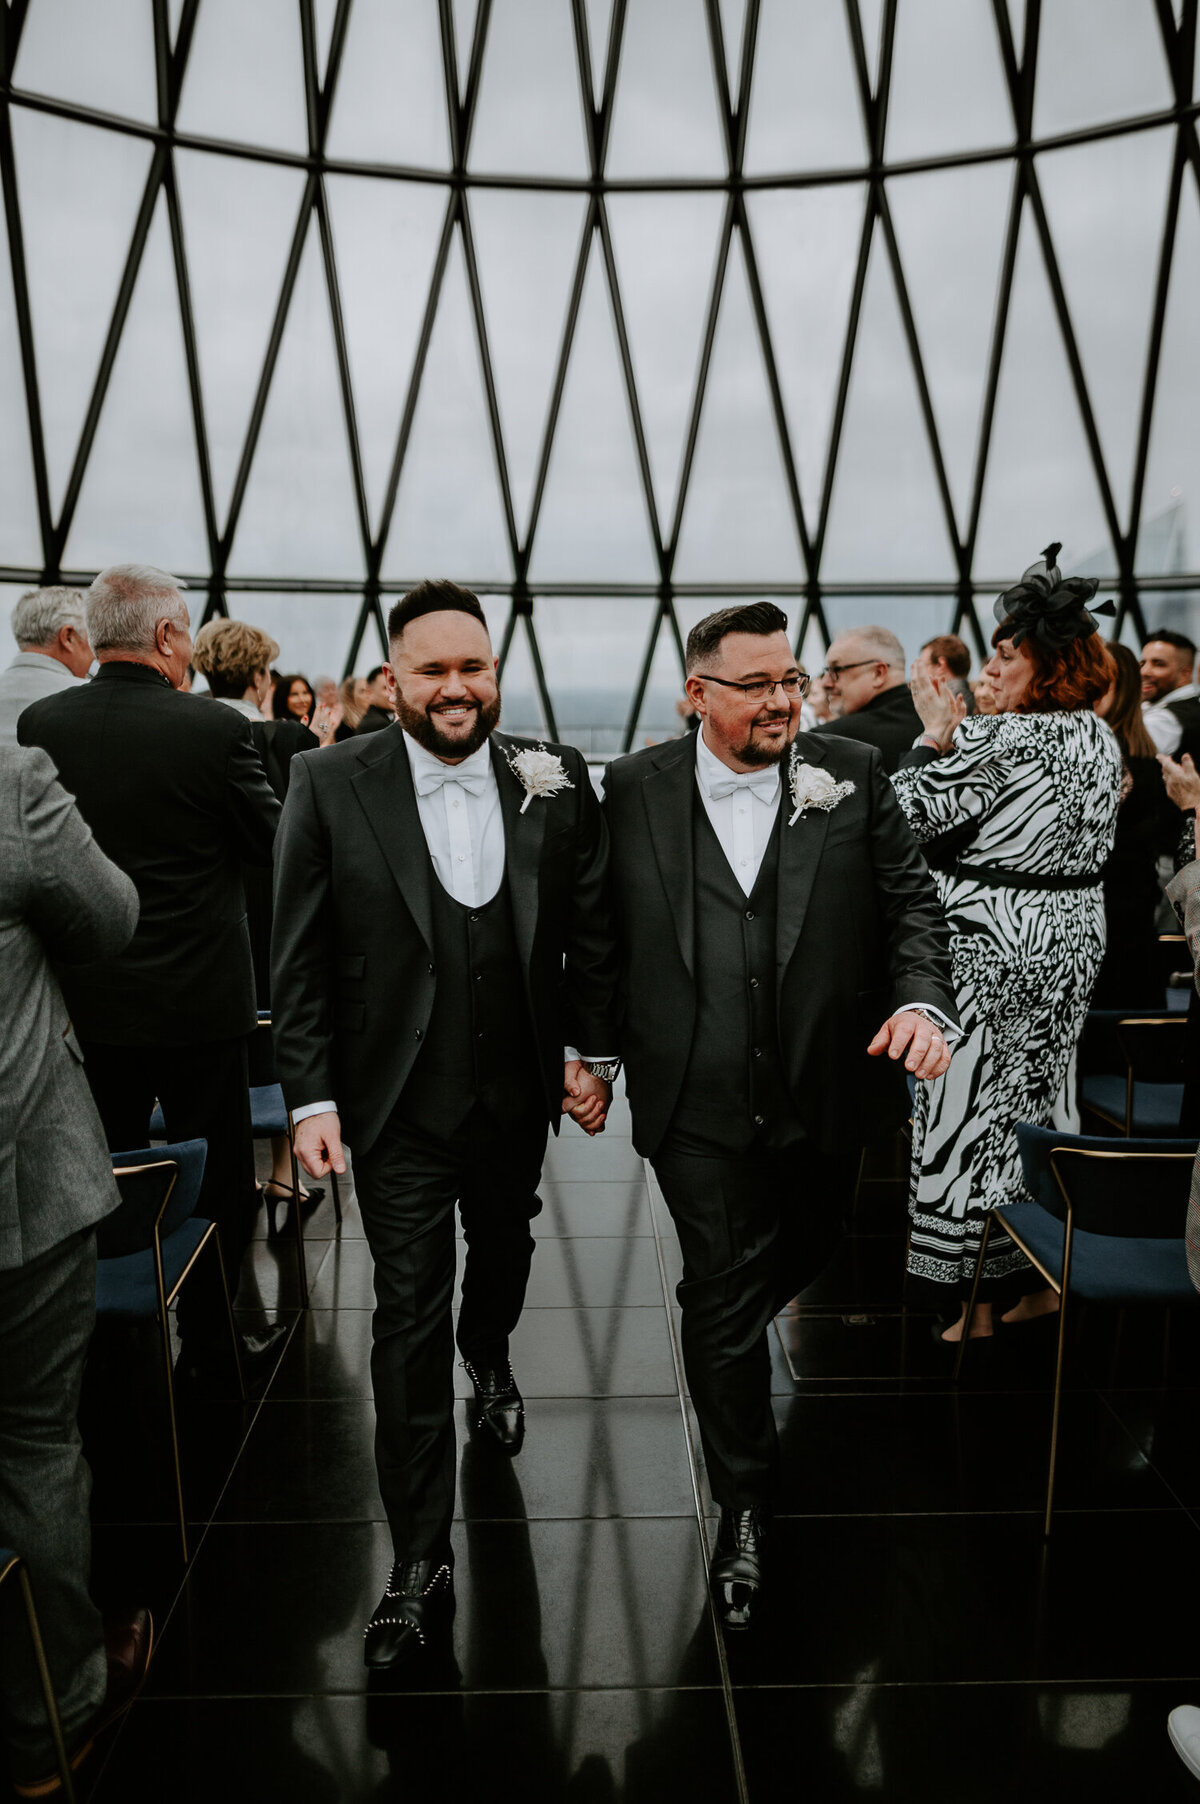 Two grooms get married at The Gherkin in London. They both wore black tie suits and louboutin shoes. The women all wore white dresses and the entire wedding was monochrome apart from the guys red seals.